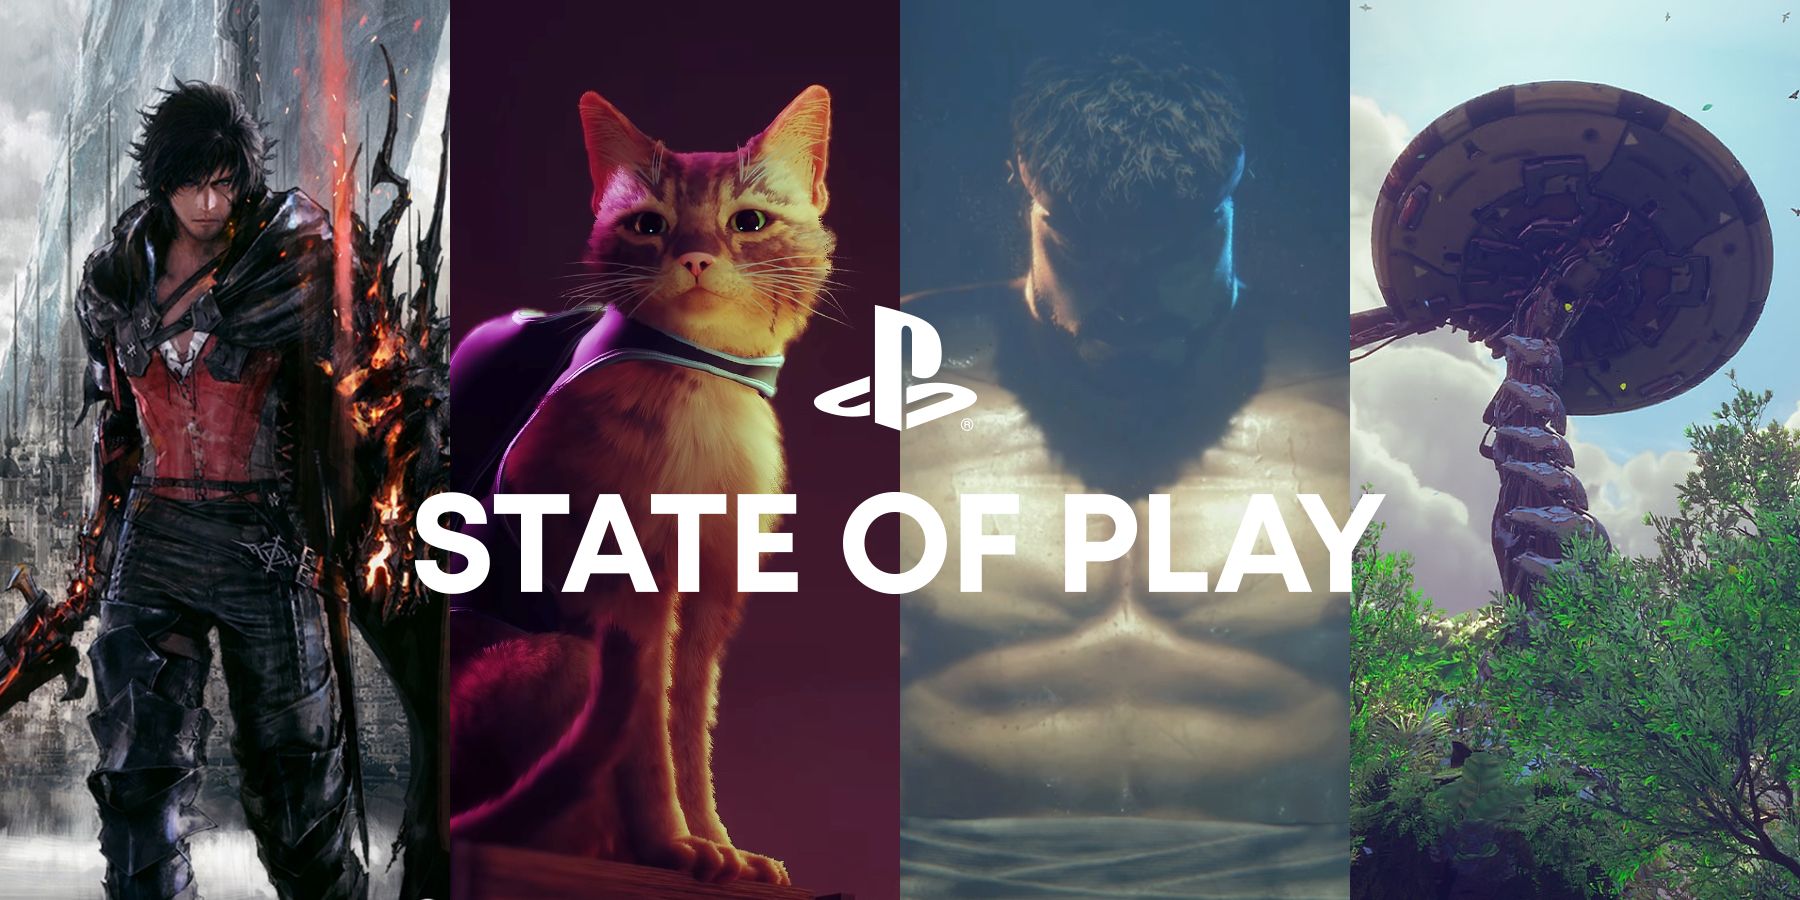 PlayStation State of Play June 2022: A List of All Games Announced